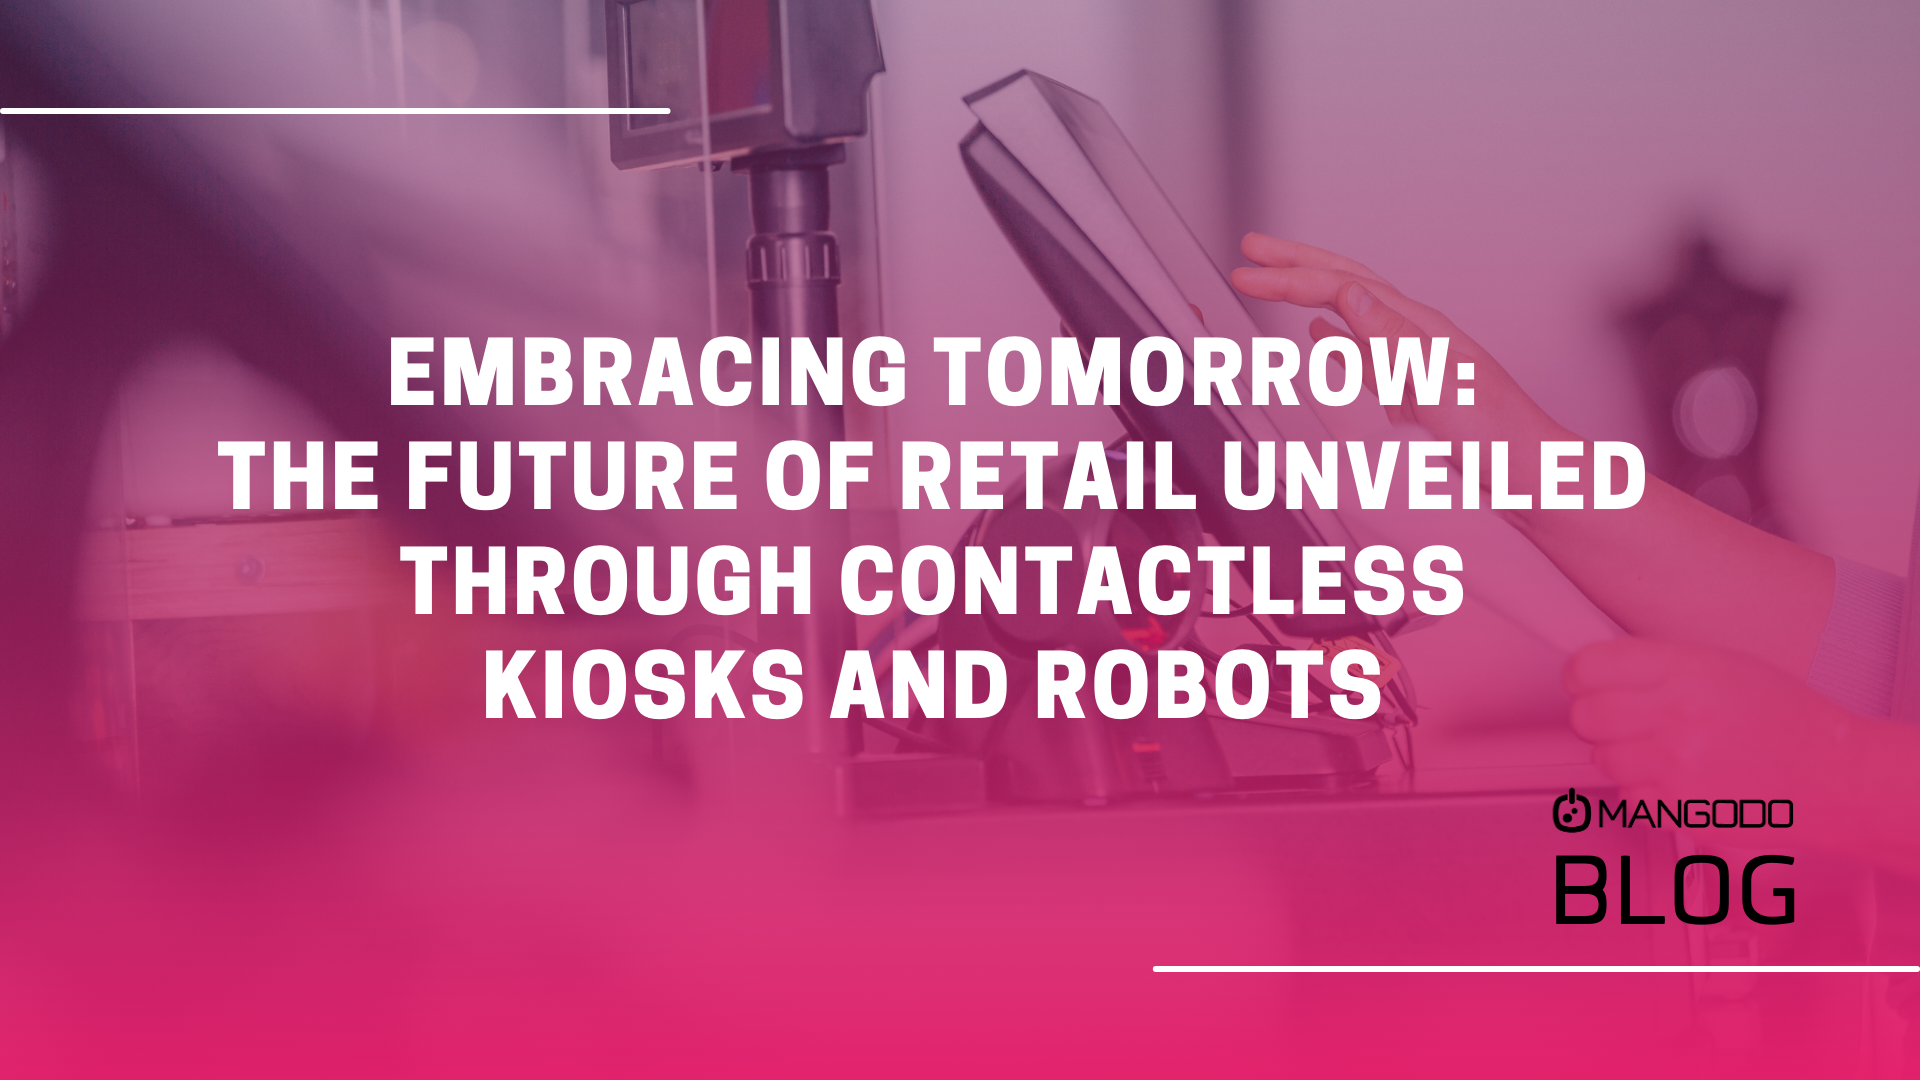 Embracing Tomorrow: The Future of Retail Unveiled Through Contactless Kiosks and Robots